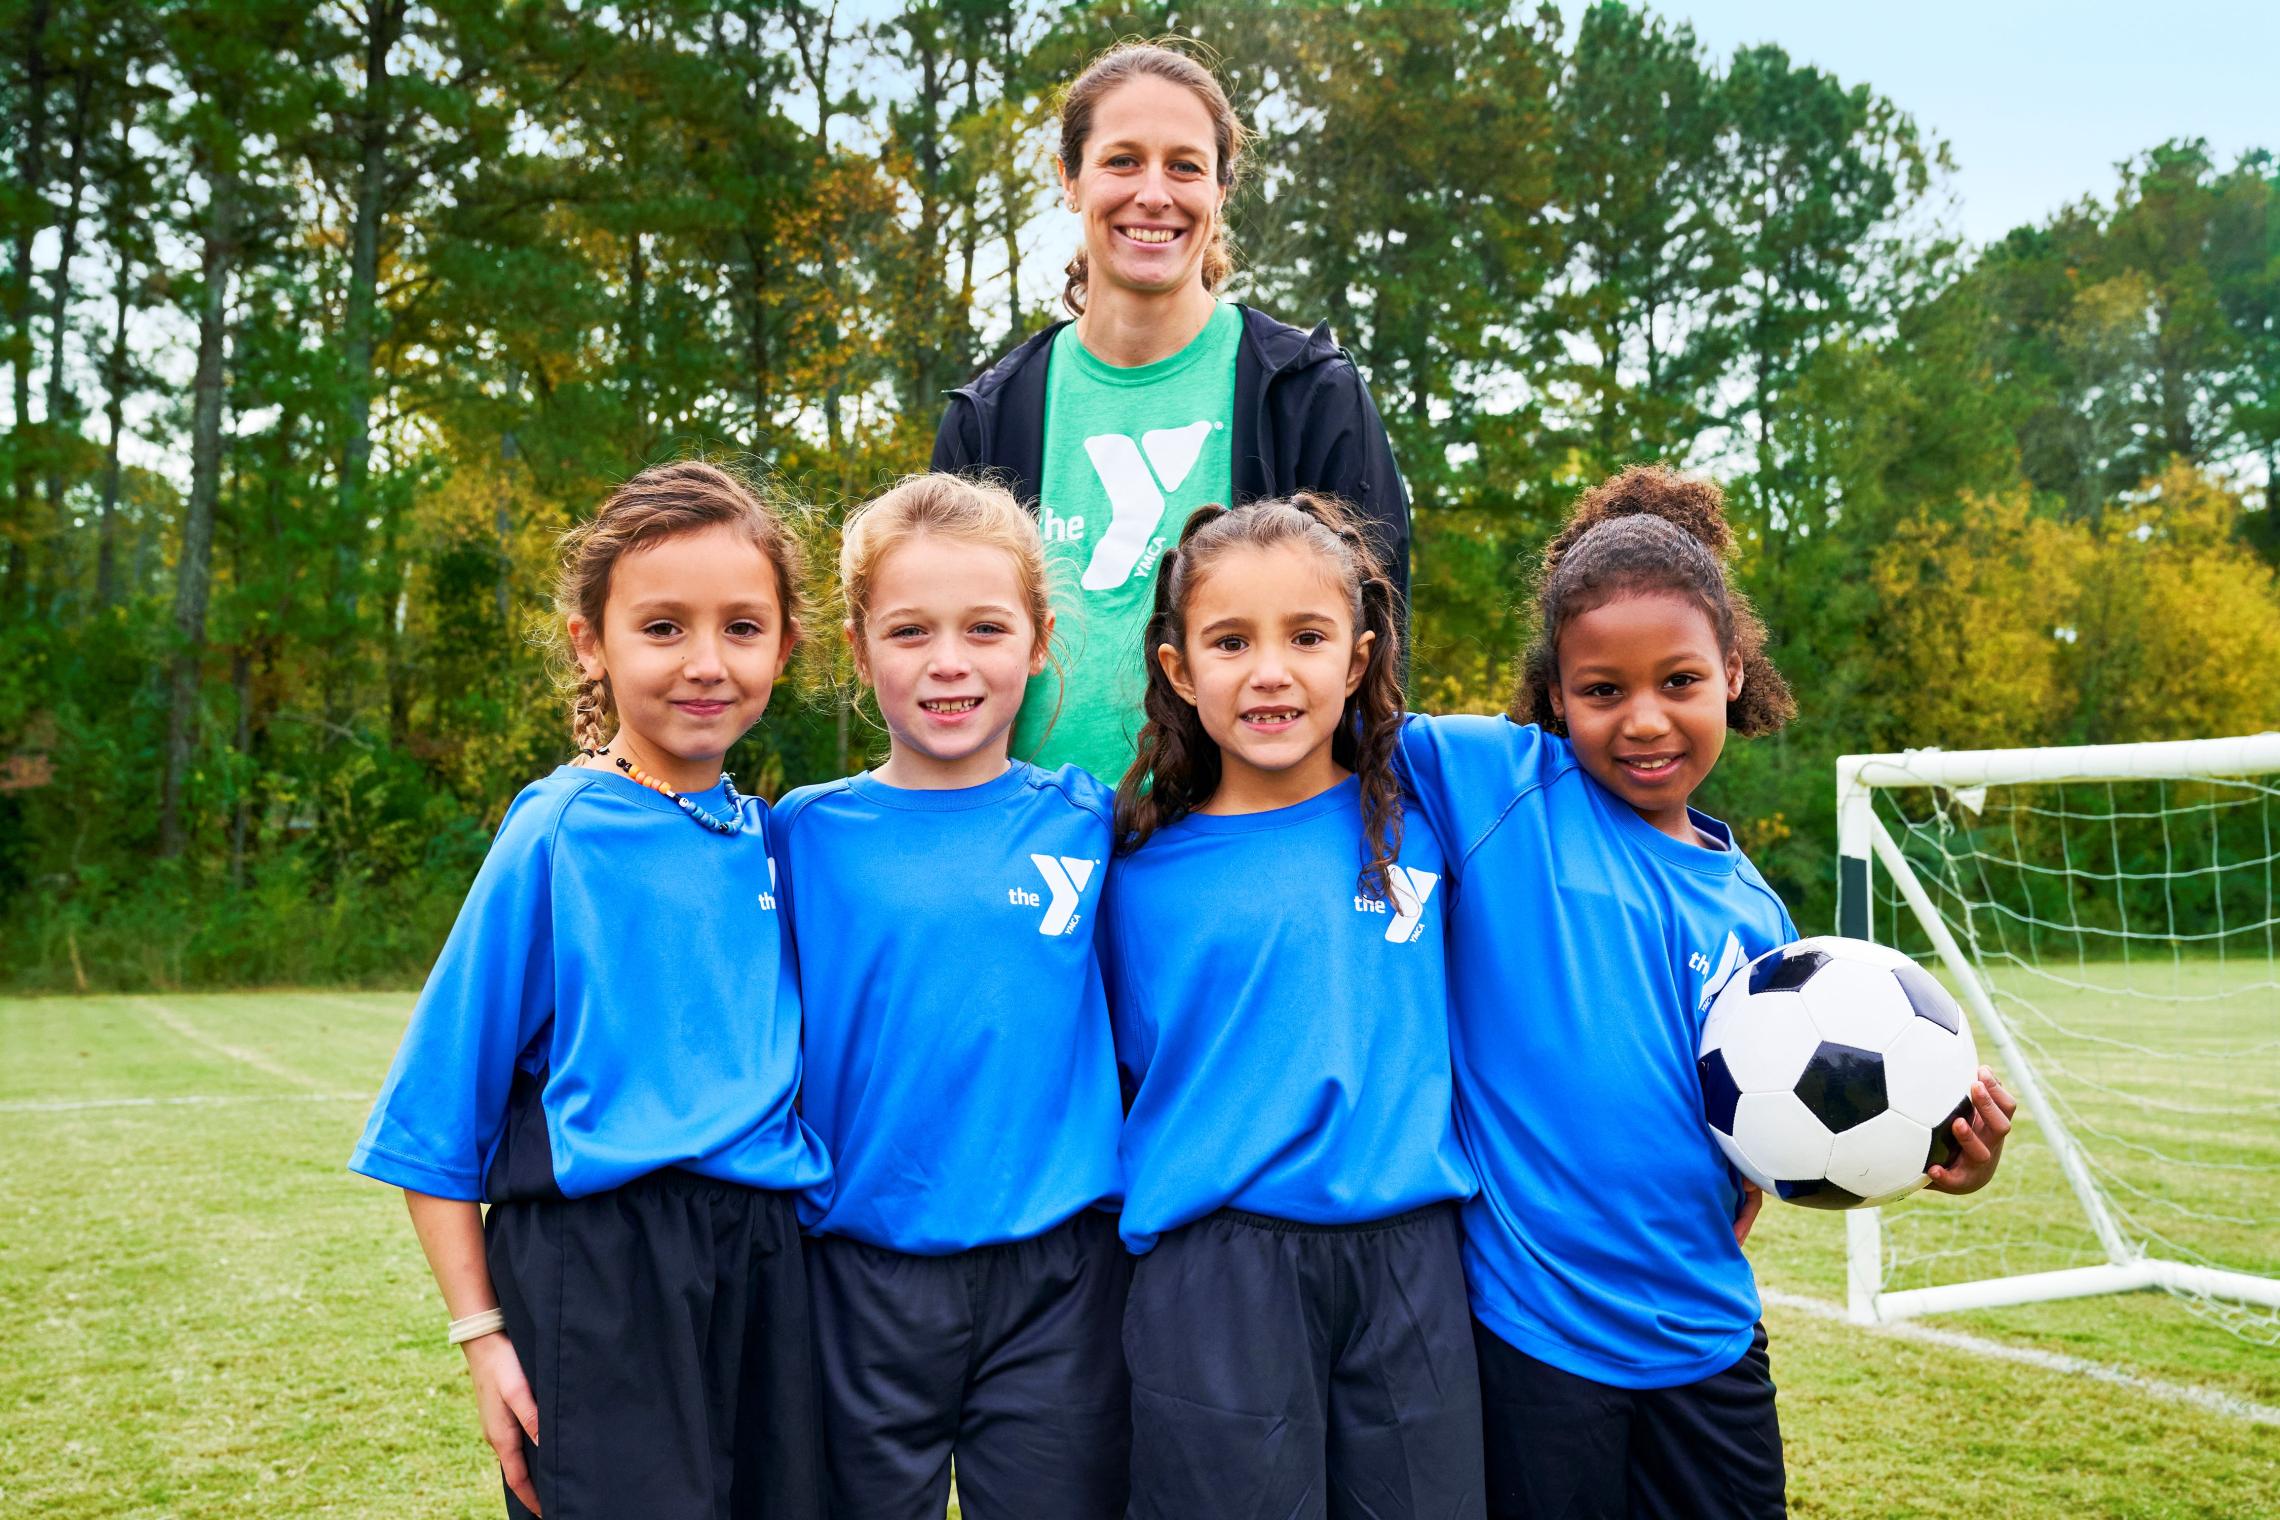 Coach with 4 girls playing soccer on a team